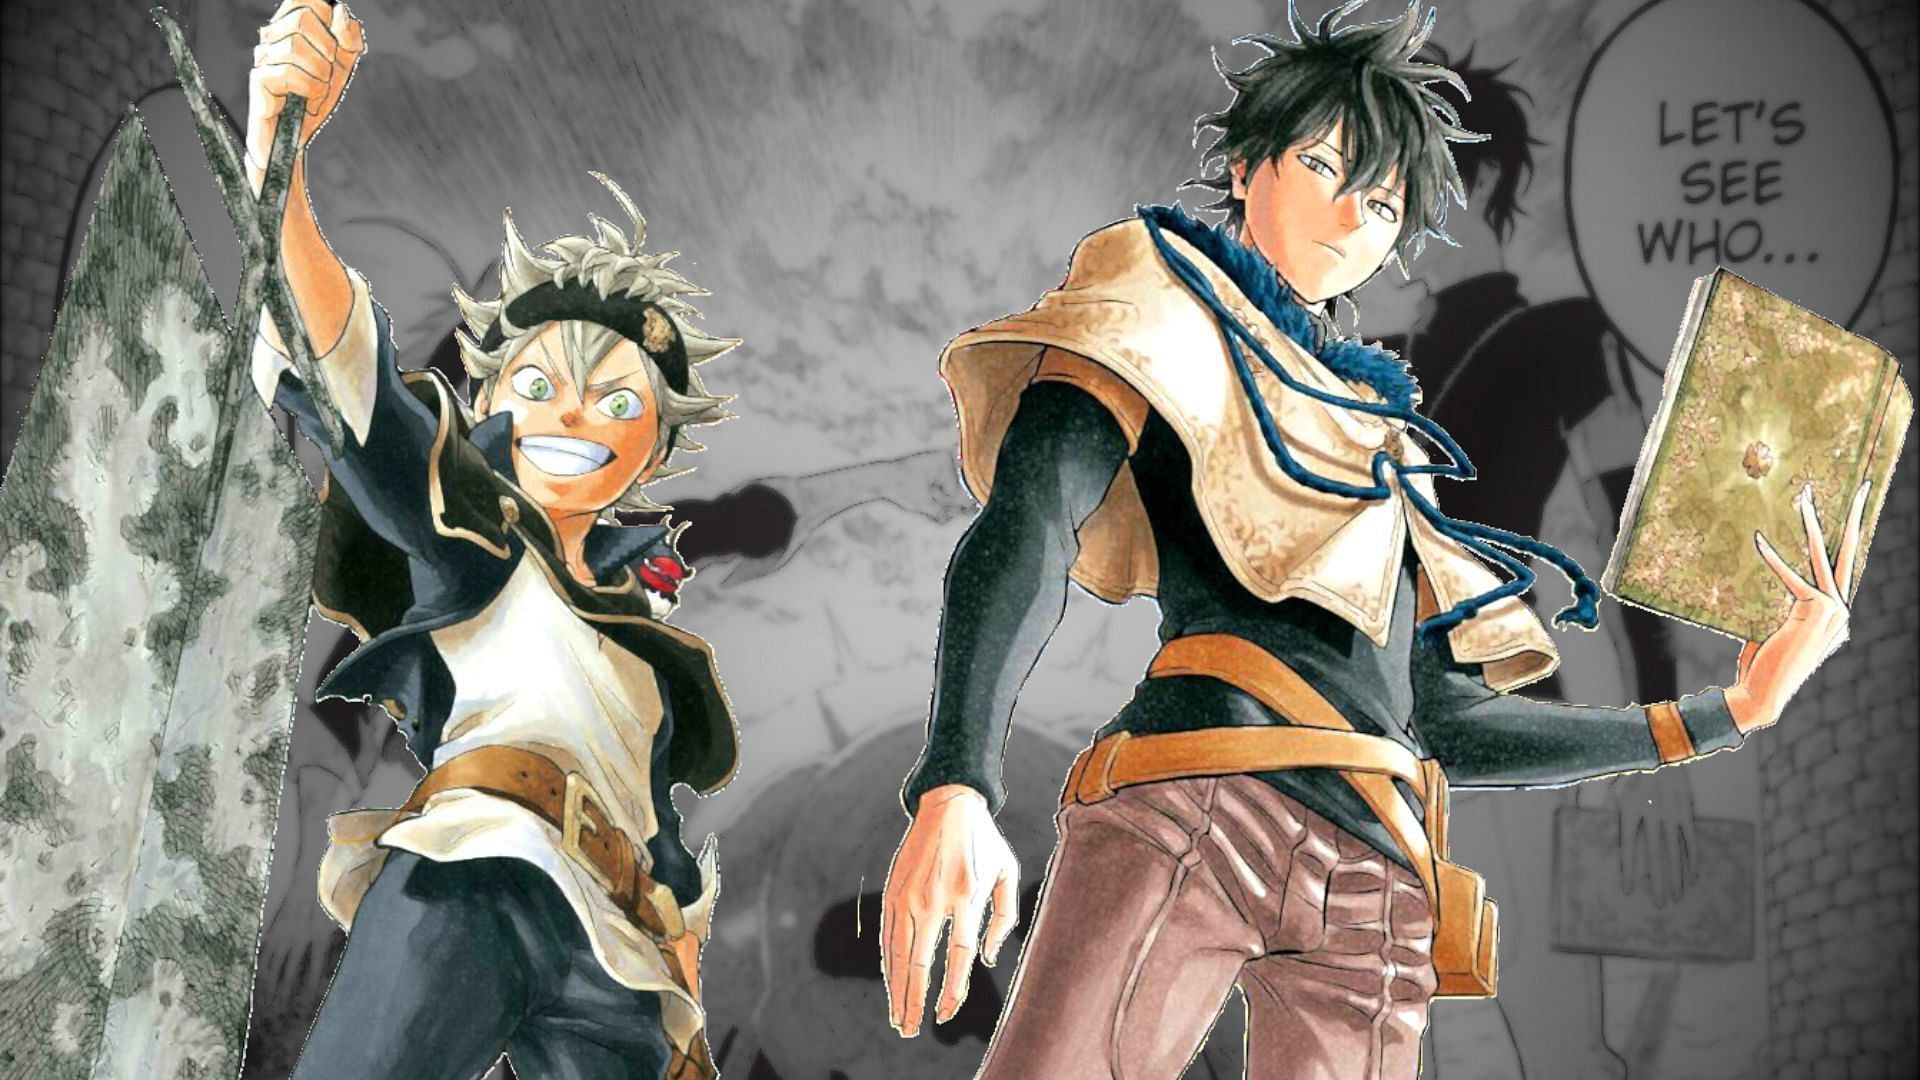 Asta and Yuno as seen in Black Clover